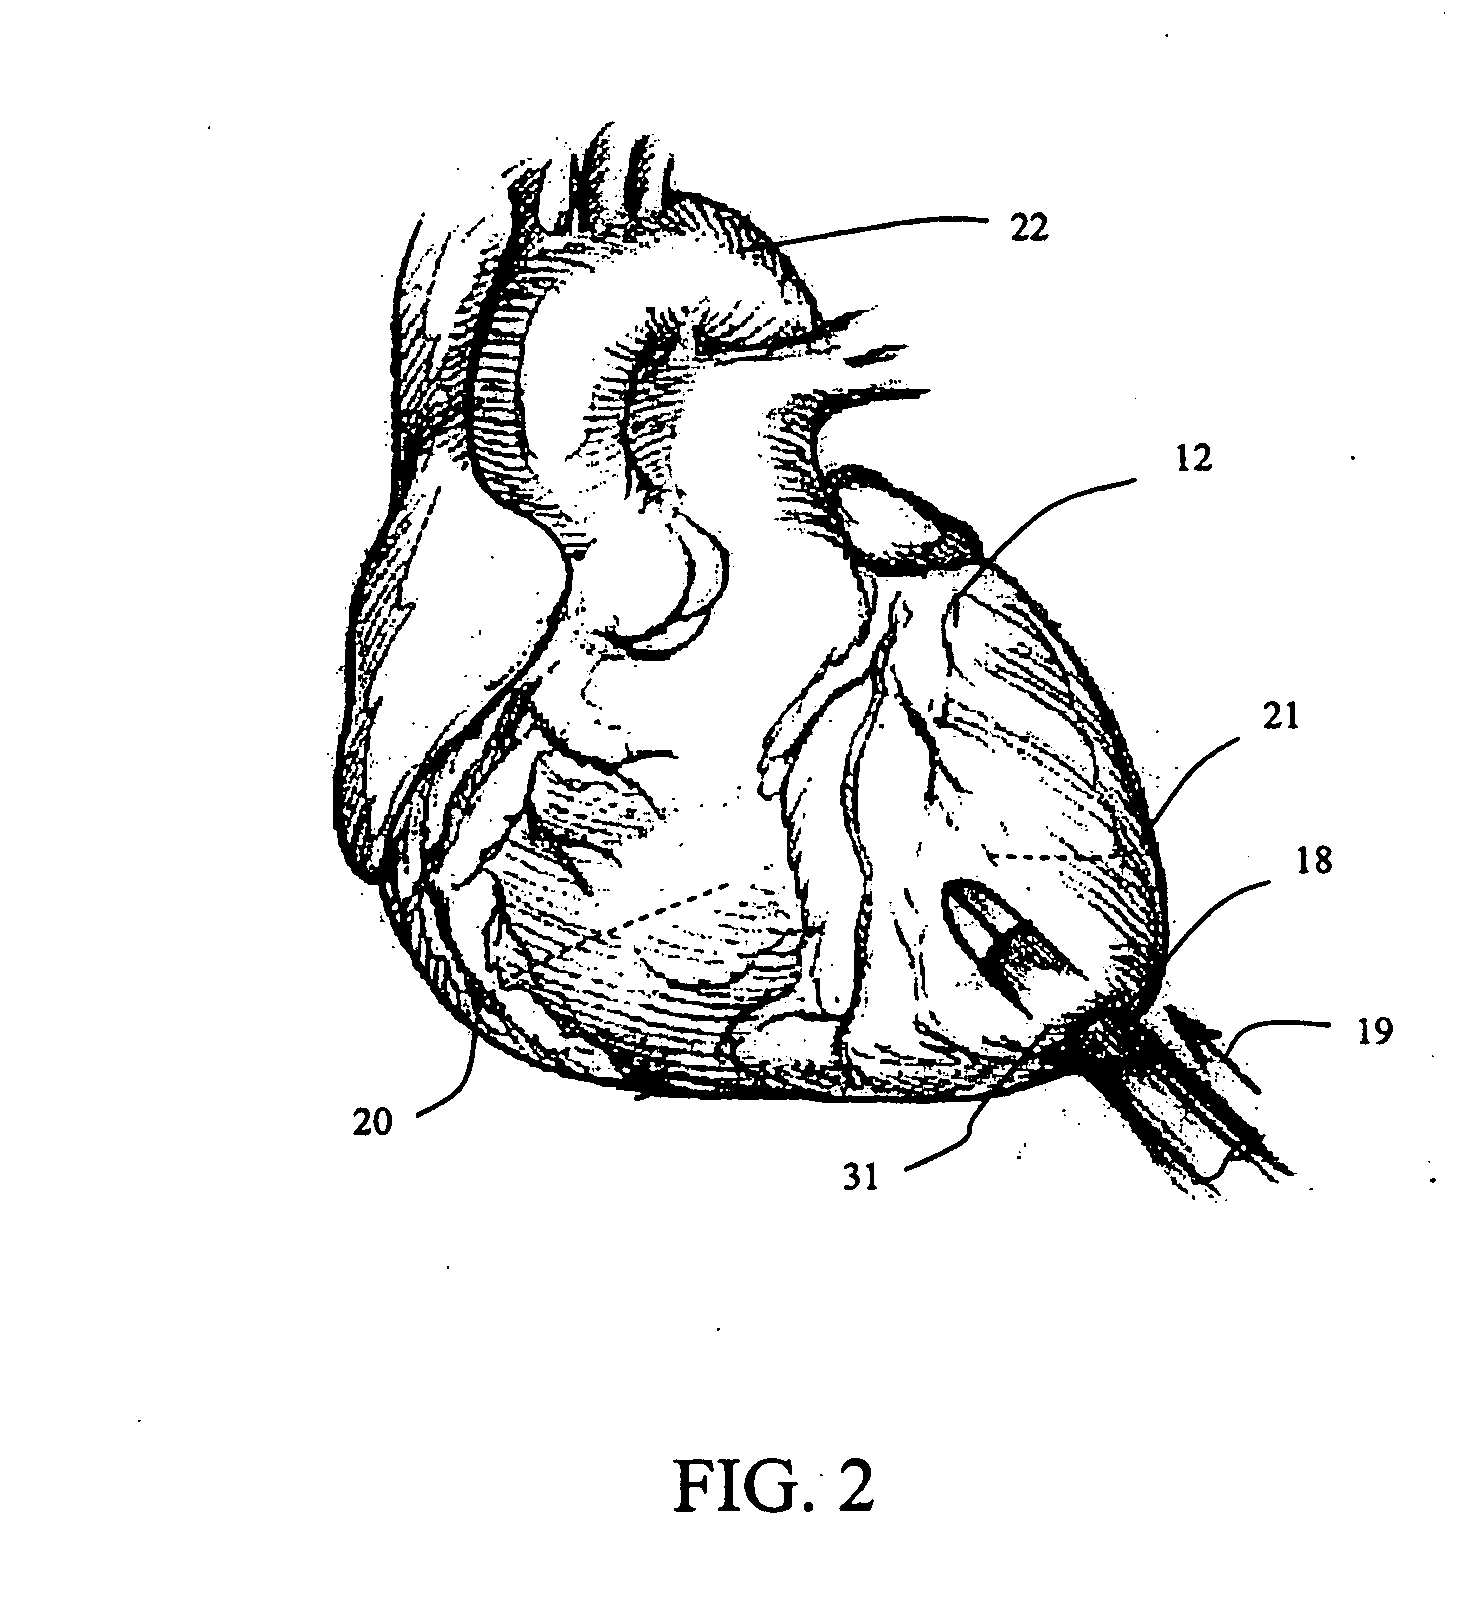 Method and system for cardiac valve delivery